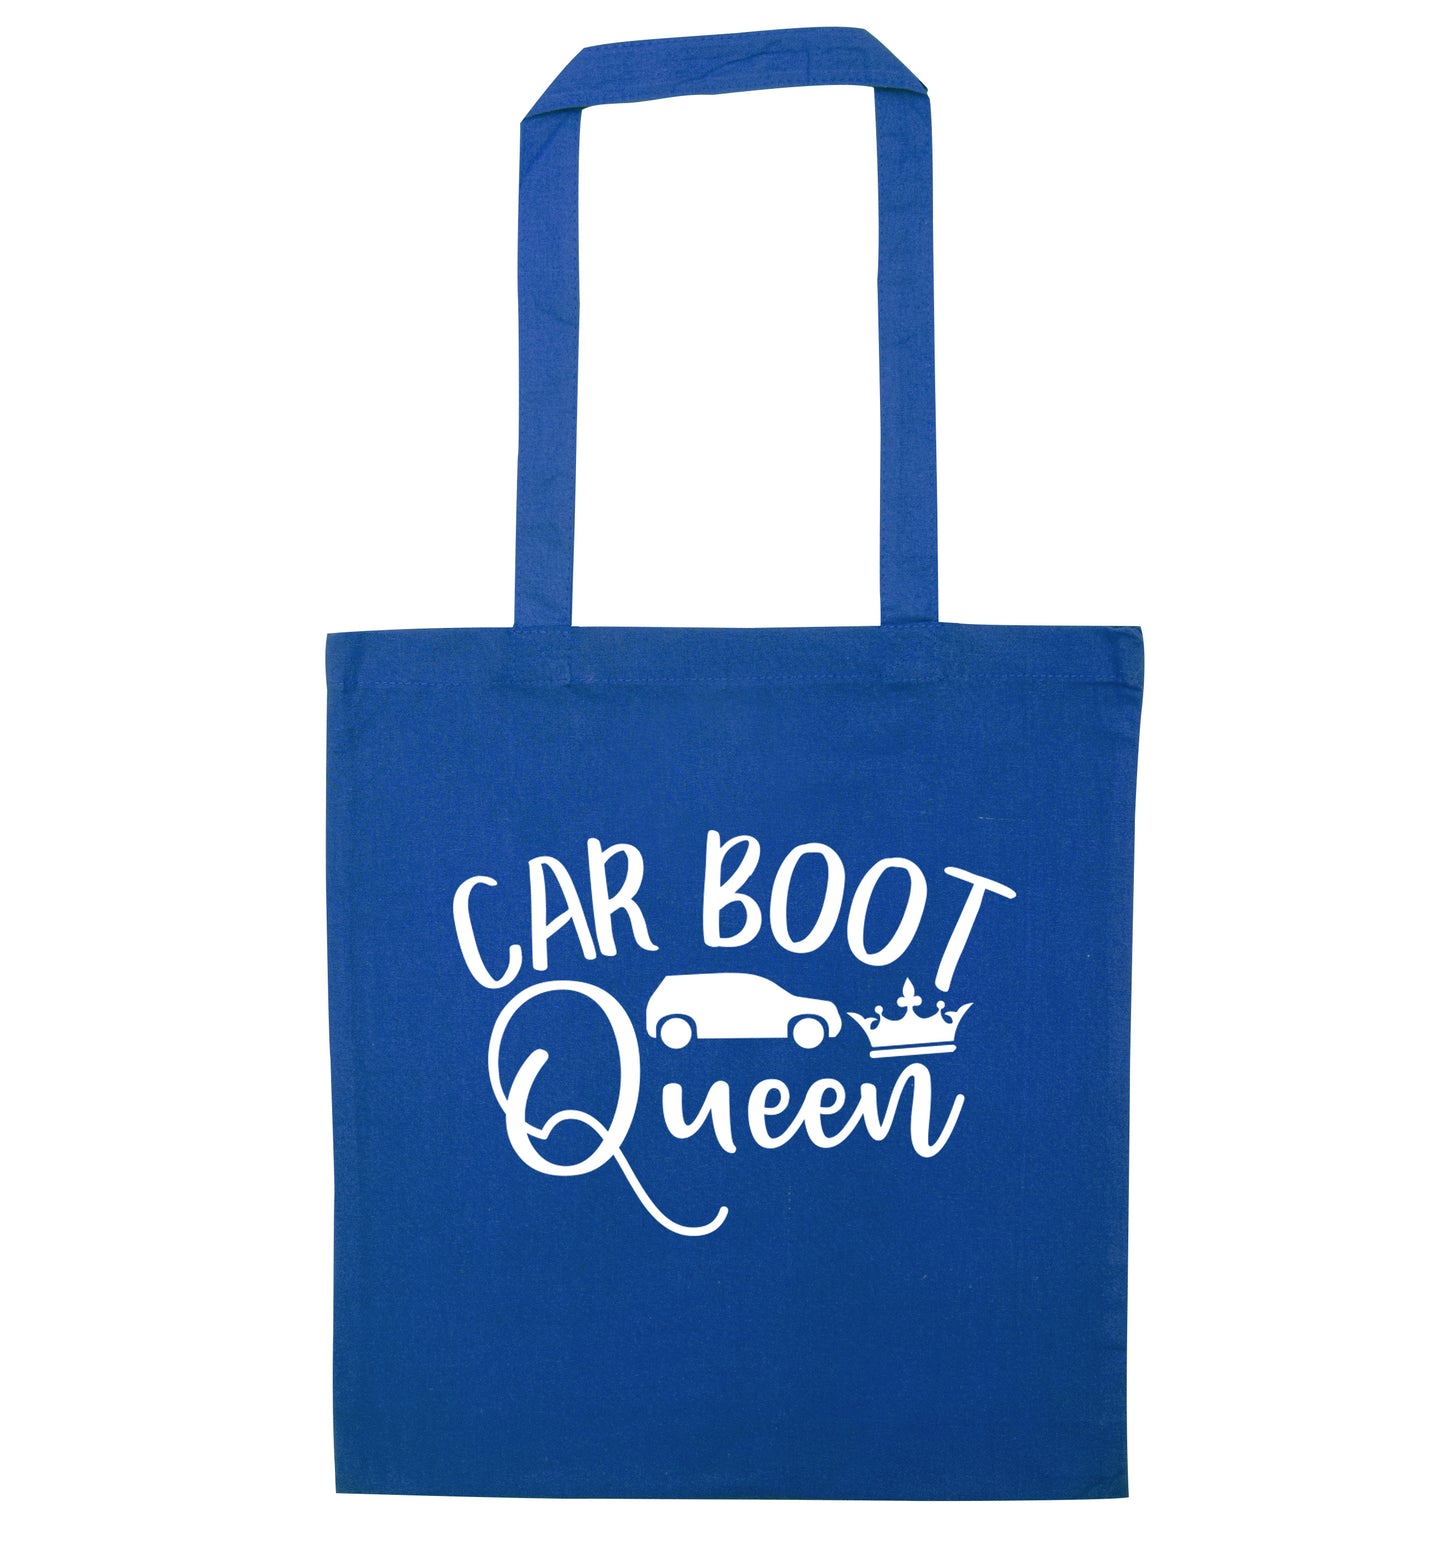 Carboot Queen blue tote bag